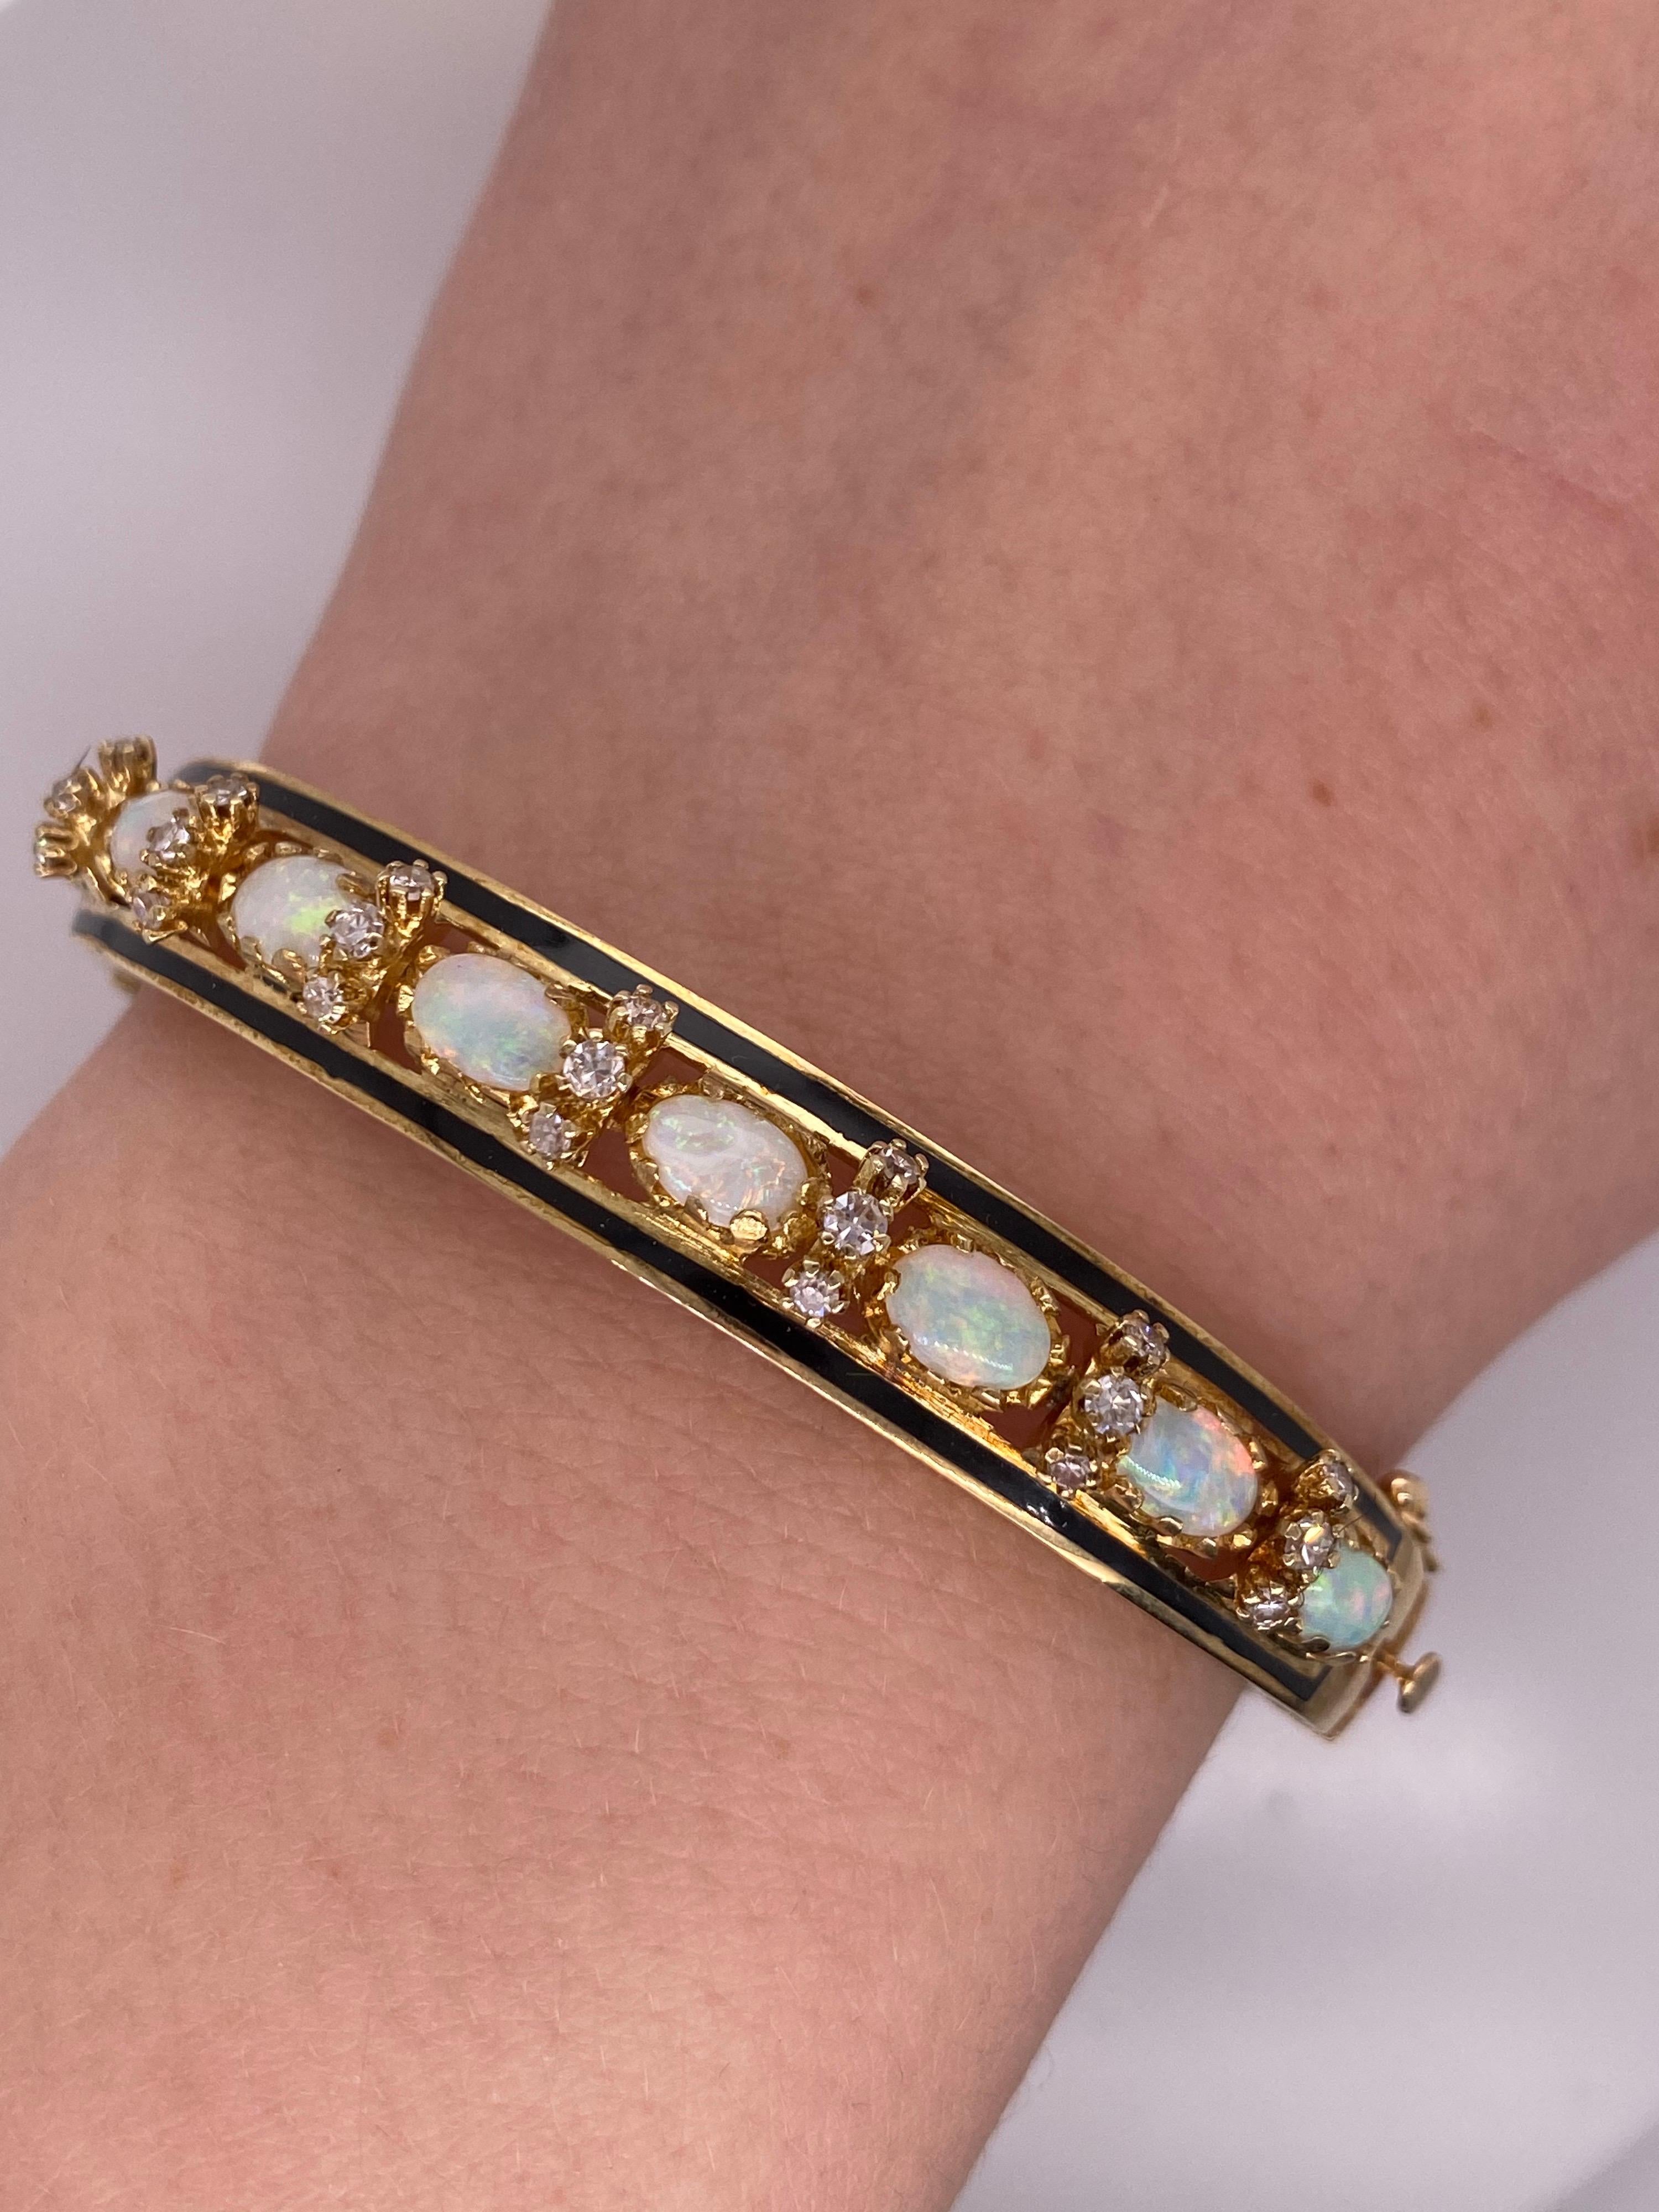 Vintage 14k Yellow Gold Victorian Reproduction Opal and Diamond Bangle Bracelet For Sale 2